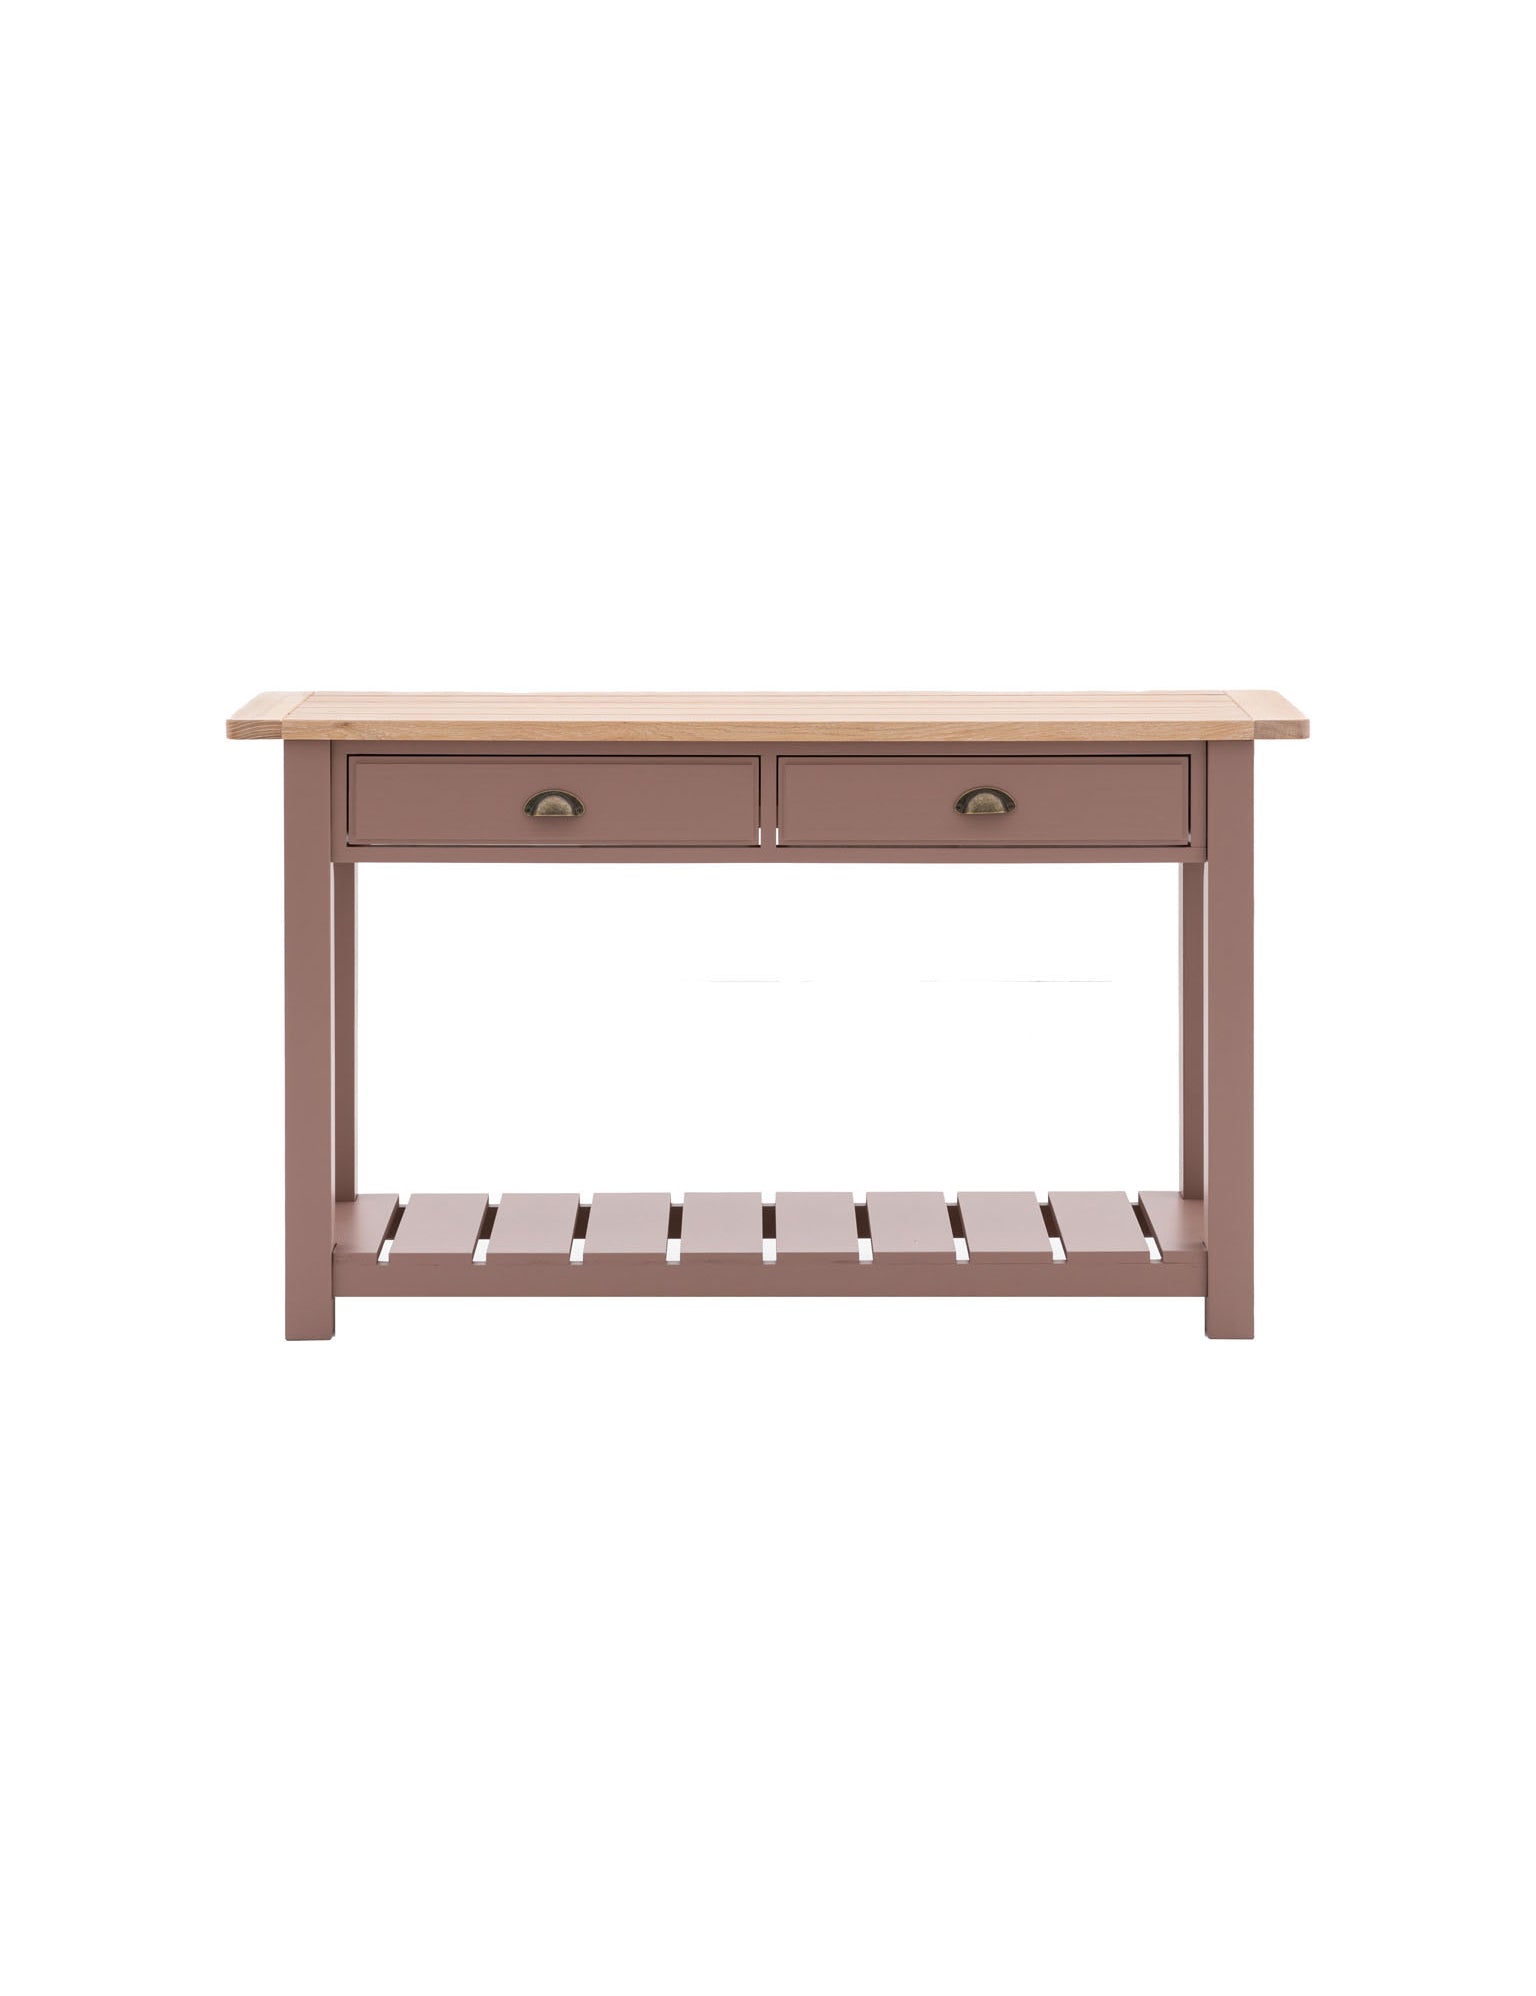 Farmhouse oak top console table painted in clay